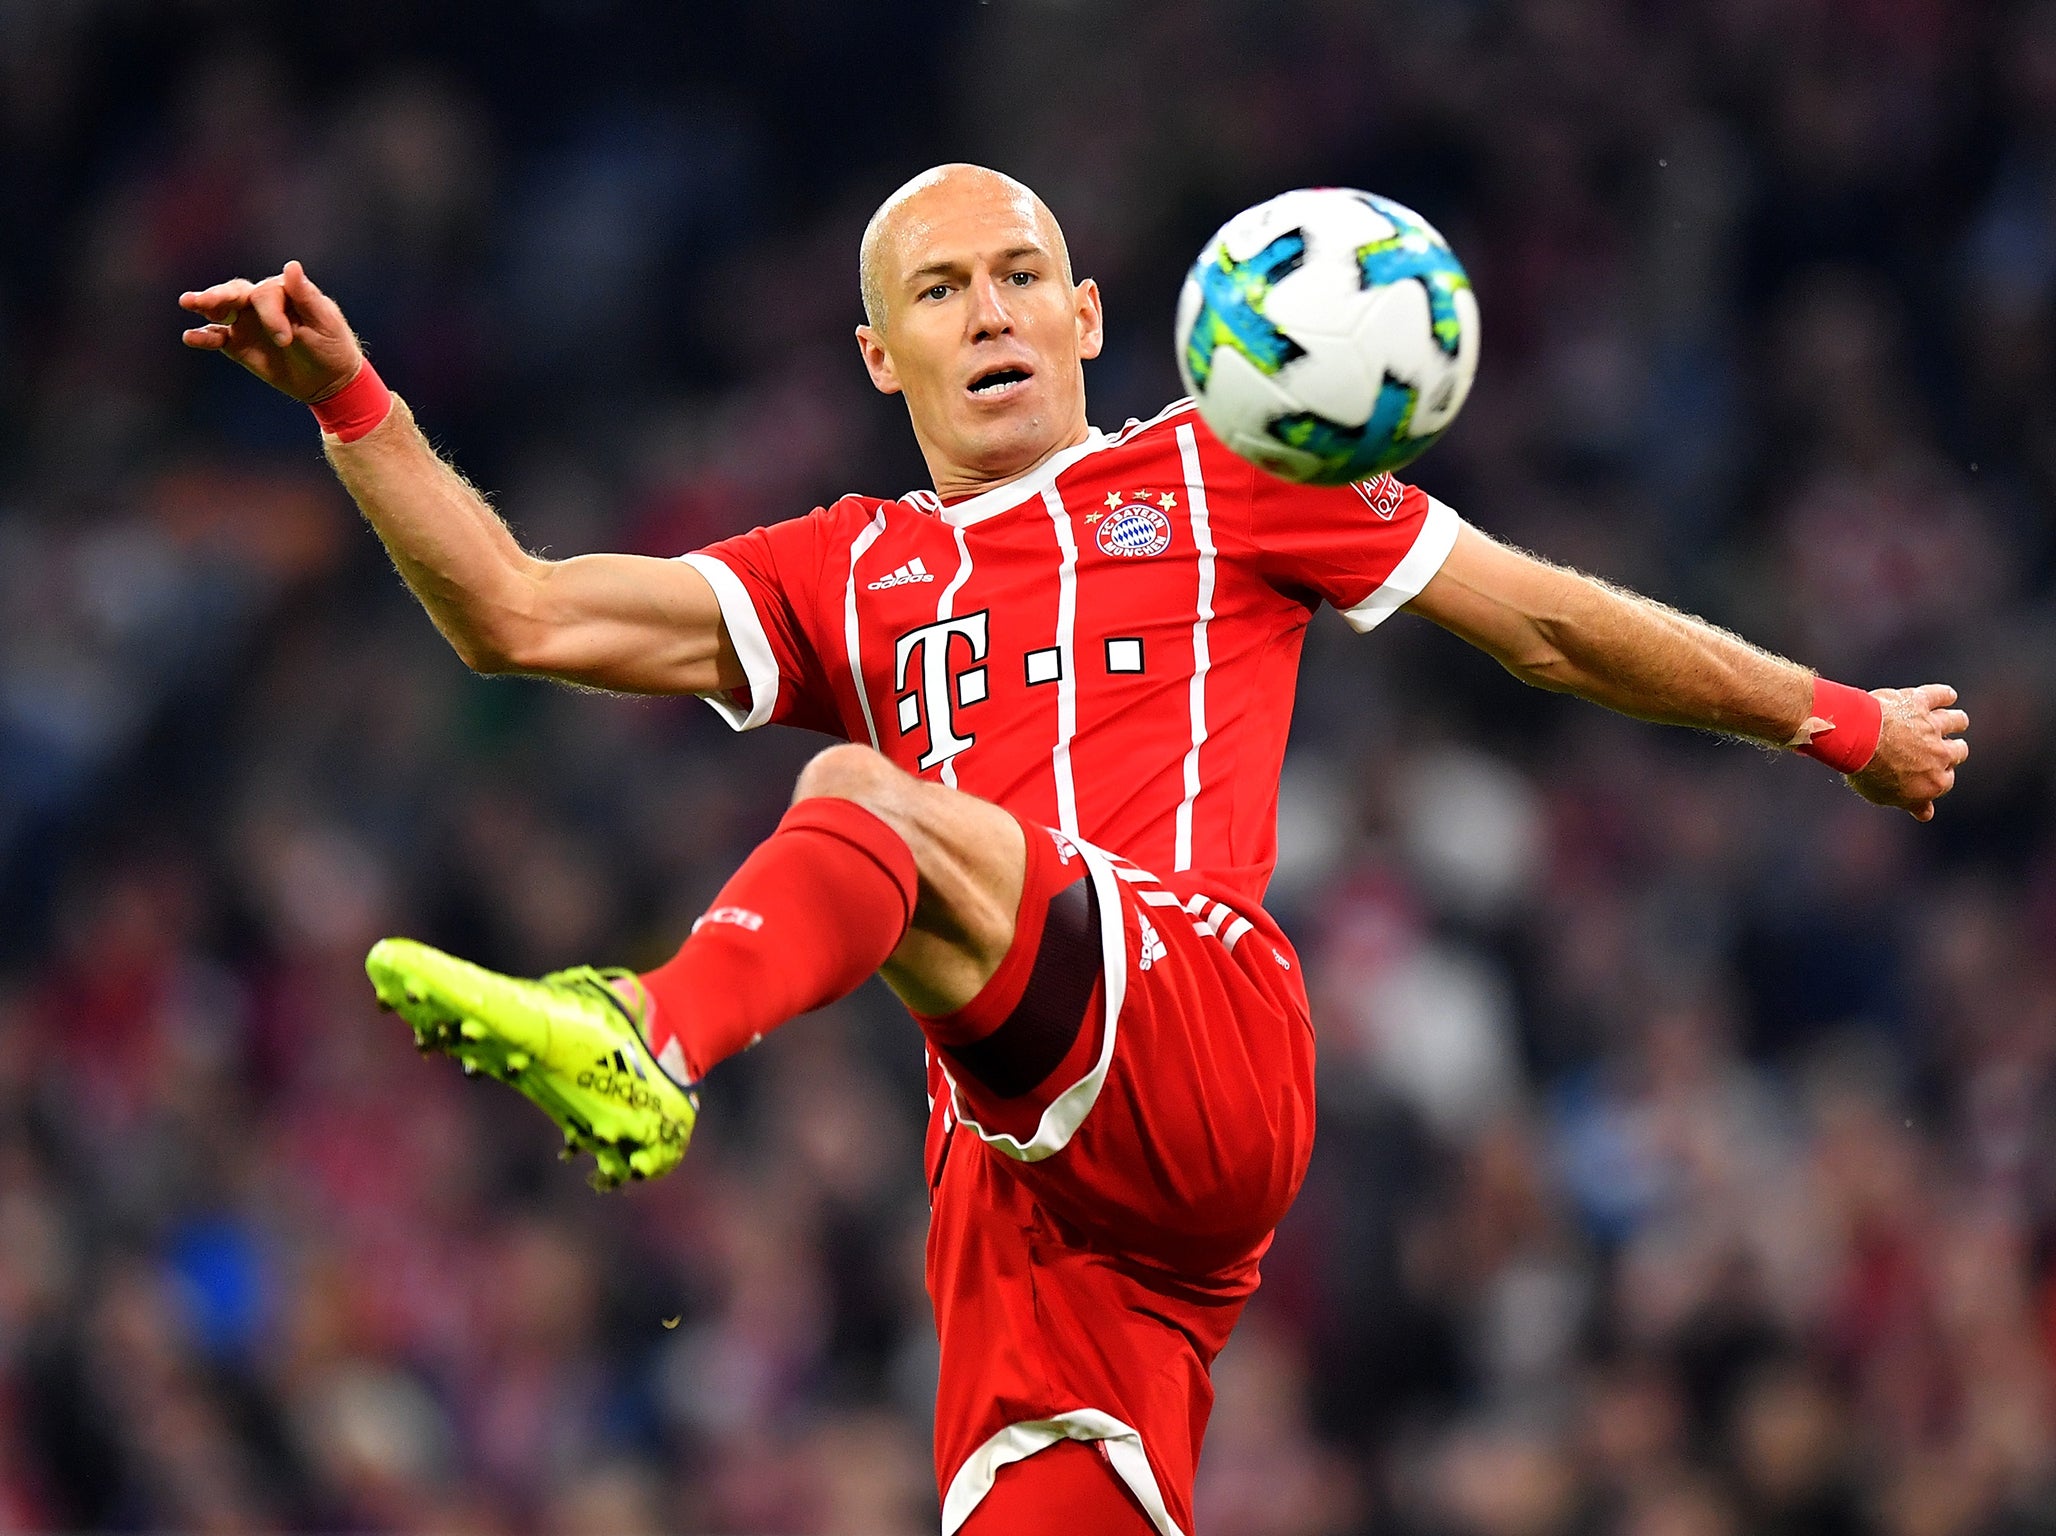 Robben has upped the ante ahead of the Champions League tie